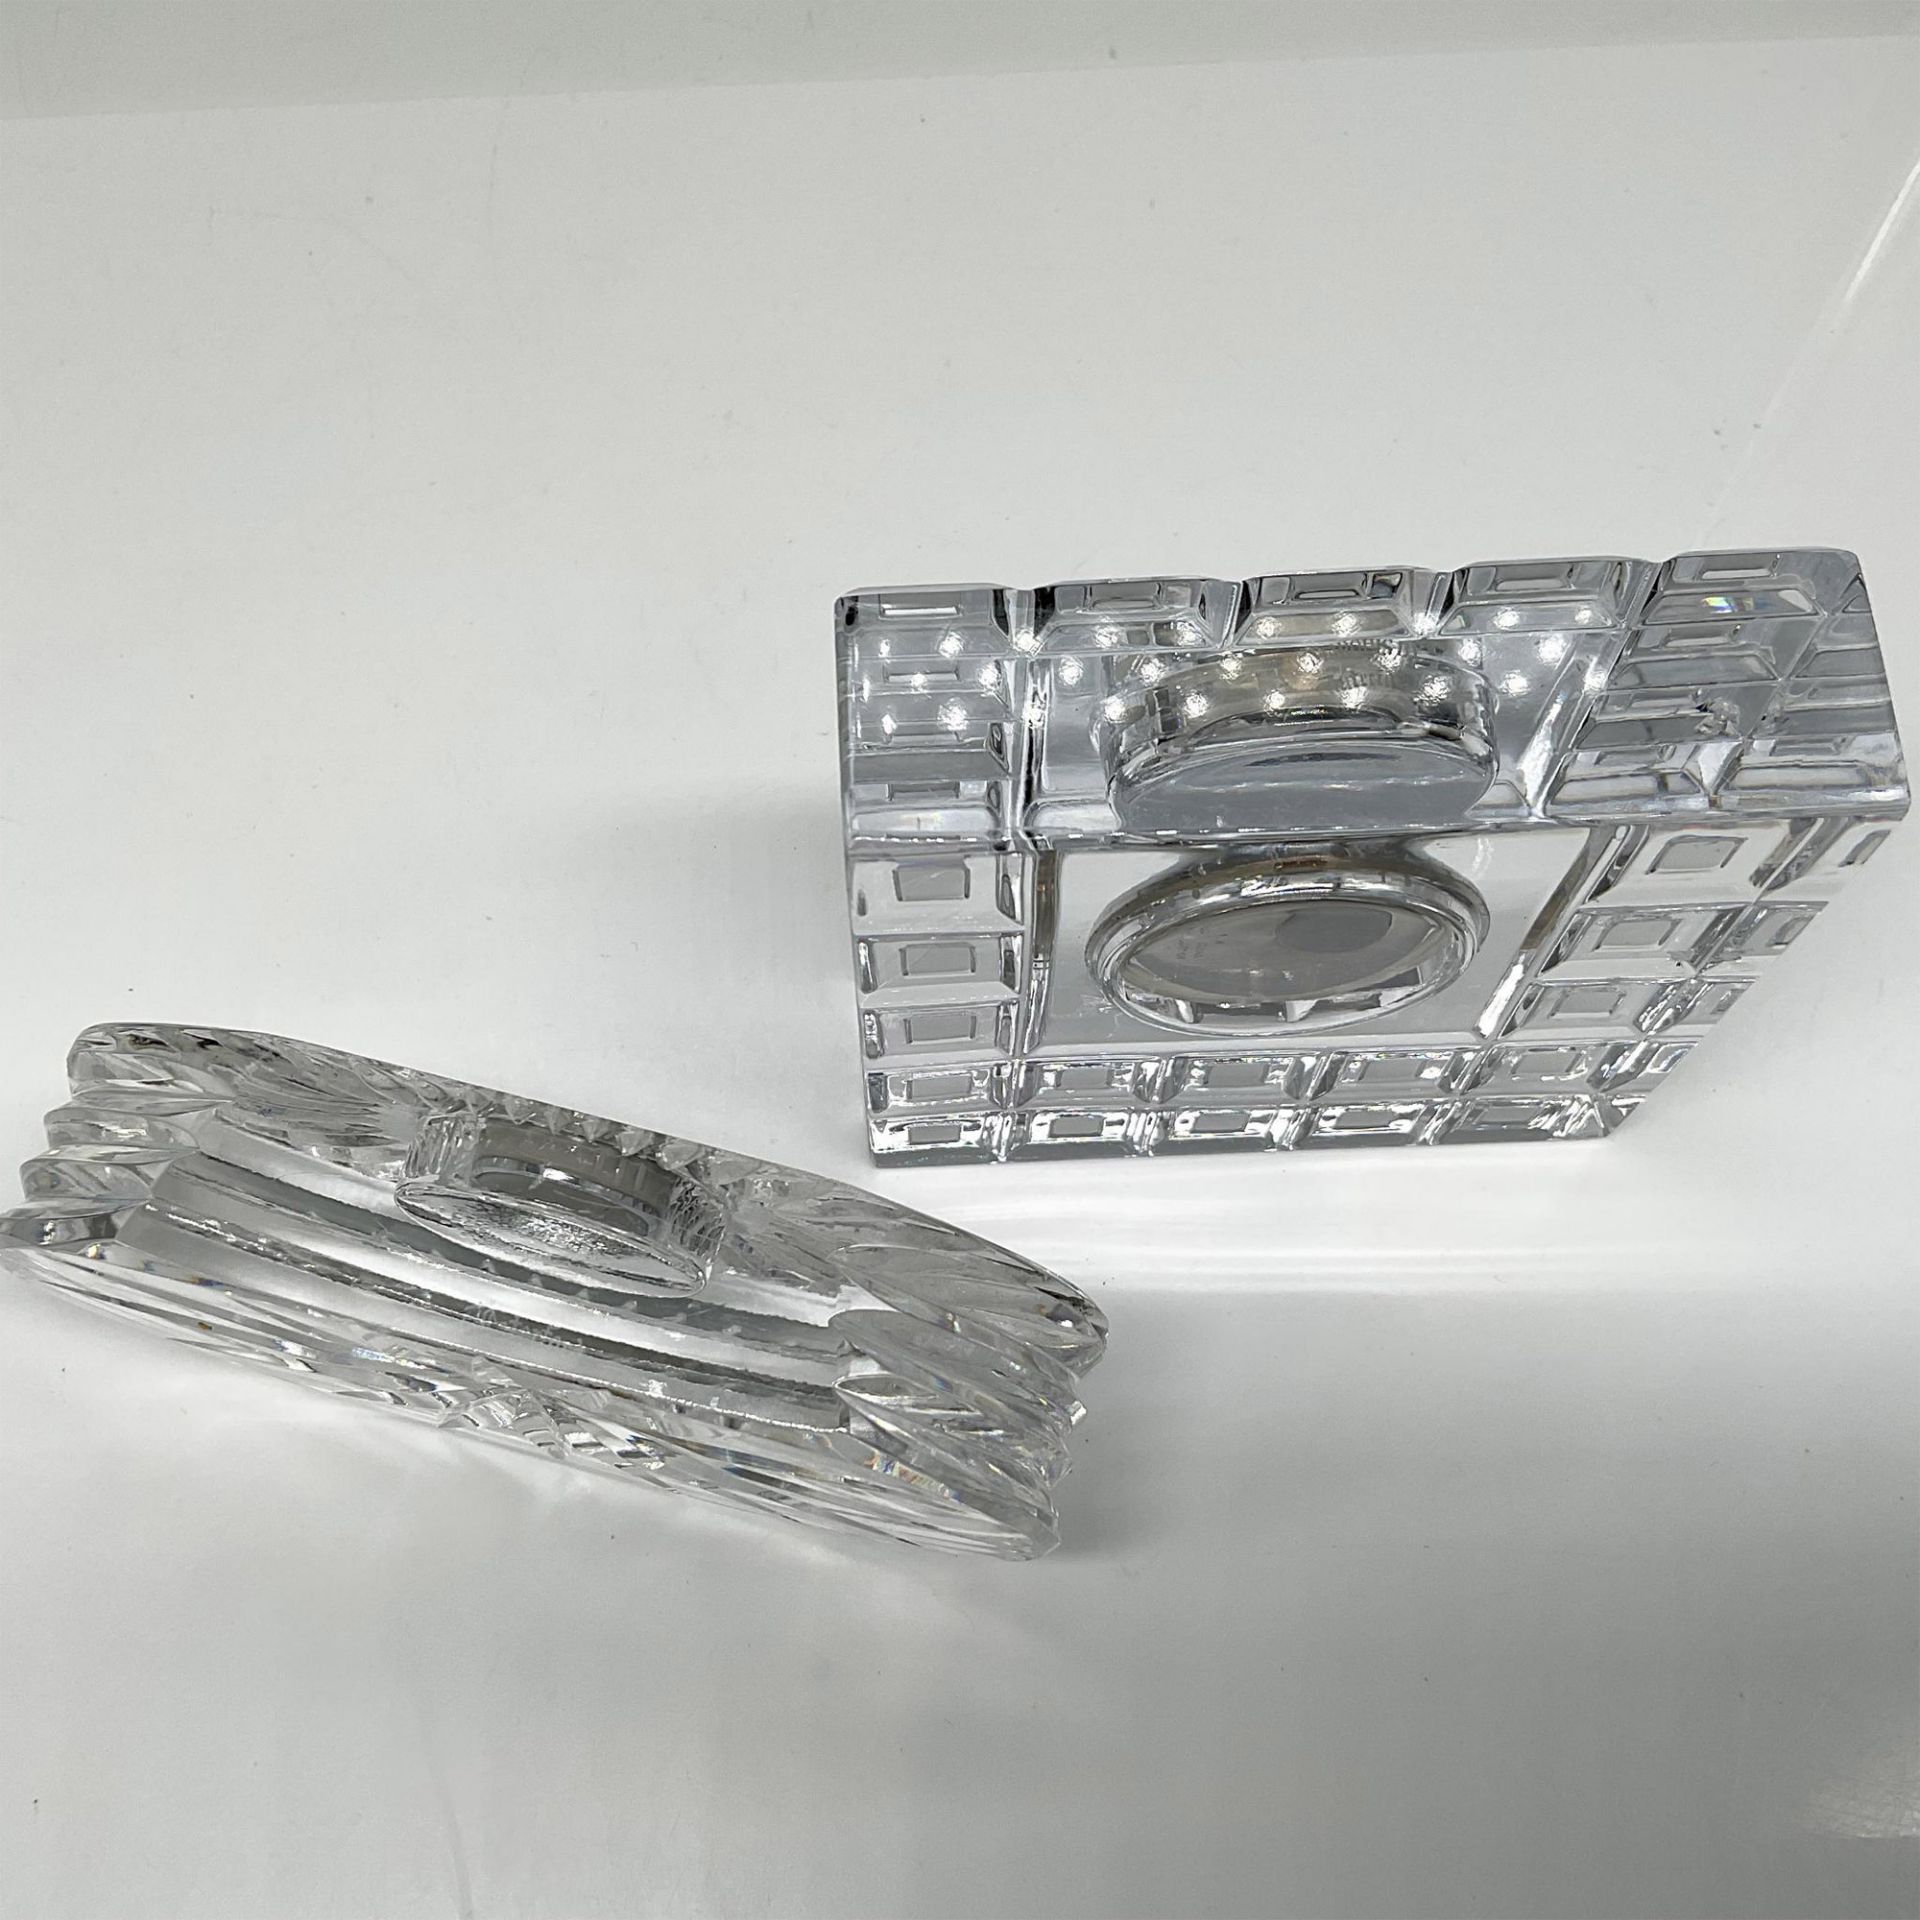 2pc Waterford Crystal Table-Desk Clocks - Image 3 of 3